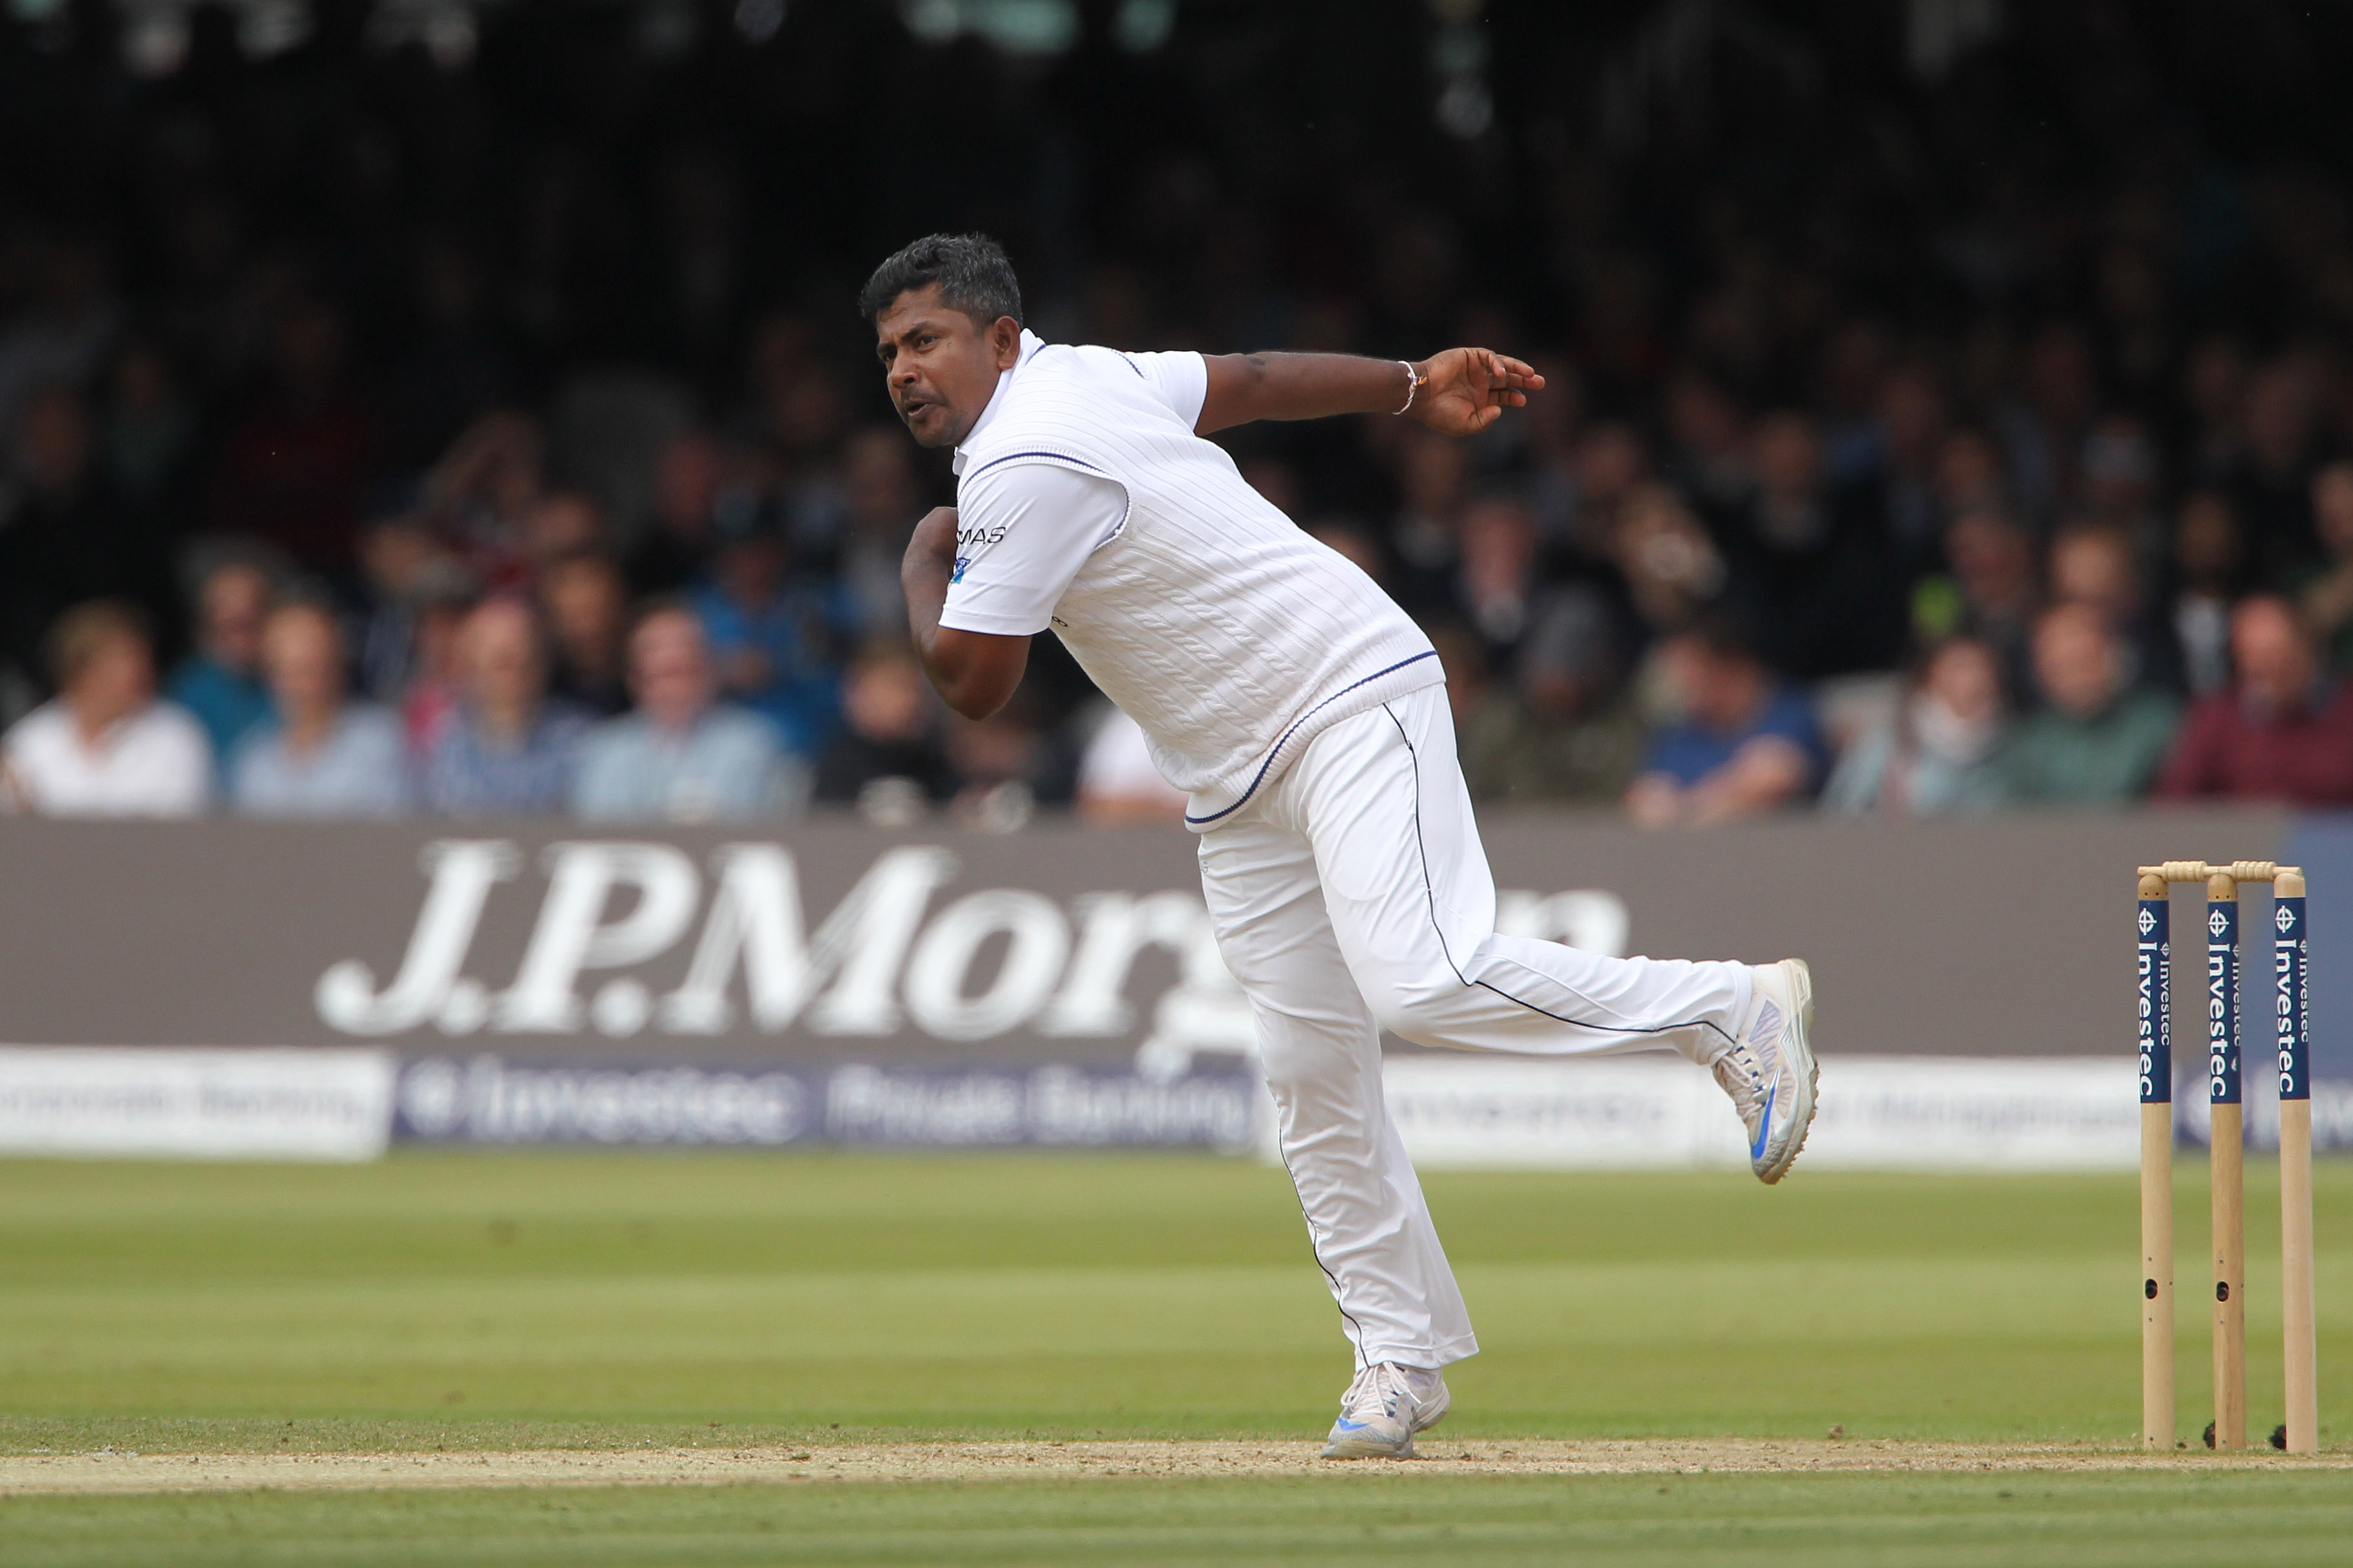 Rangana Herath and SLC deny DRS-Gate allegations